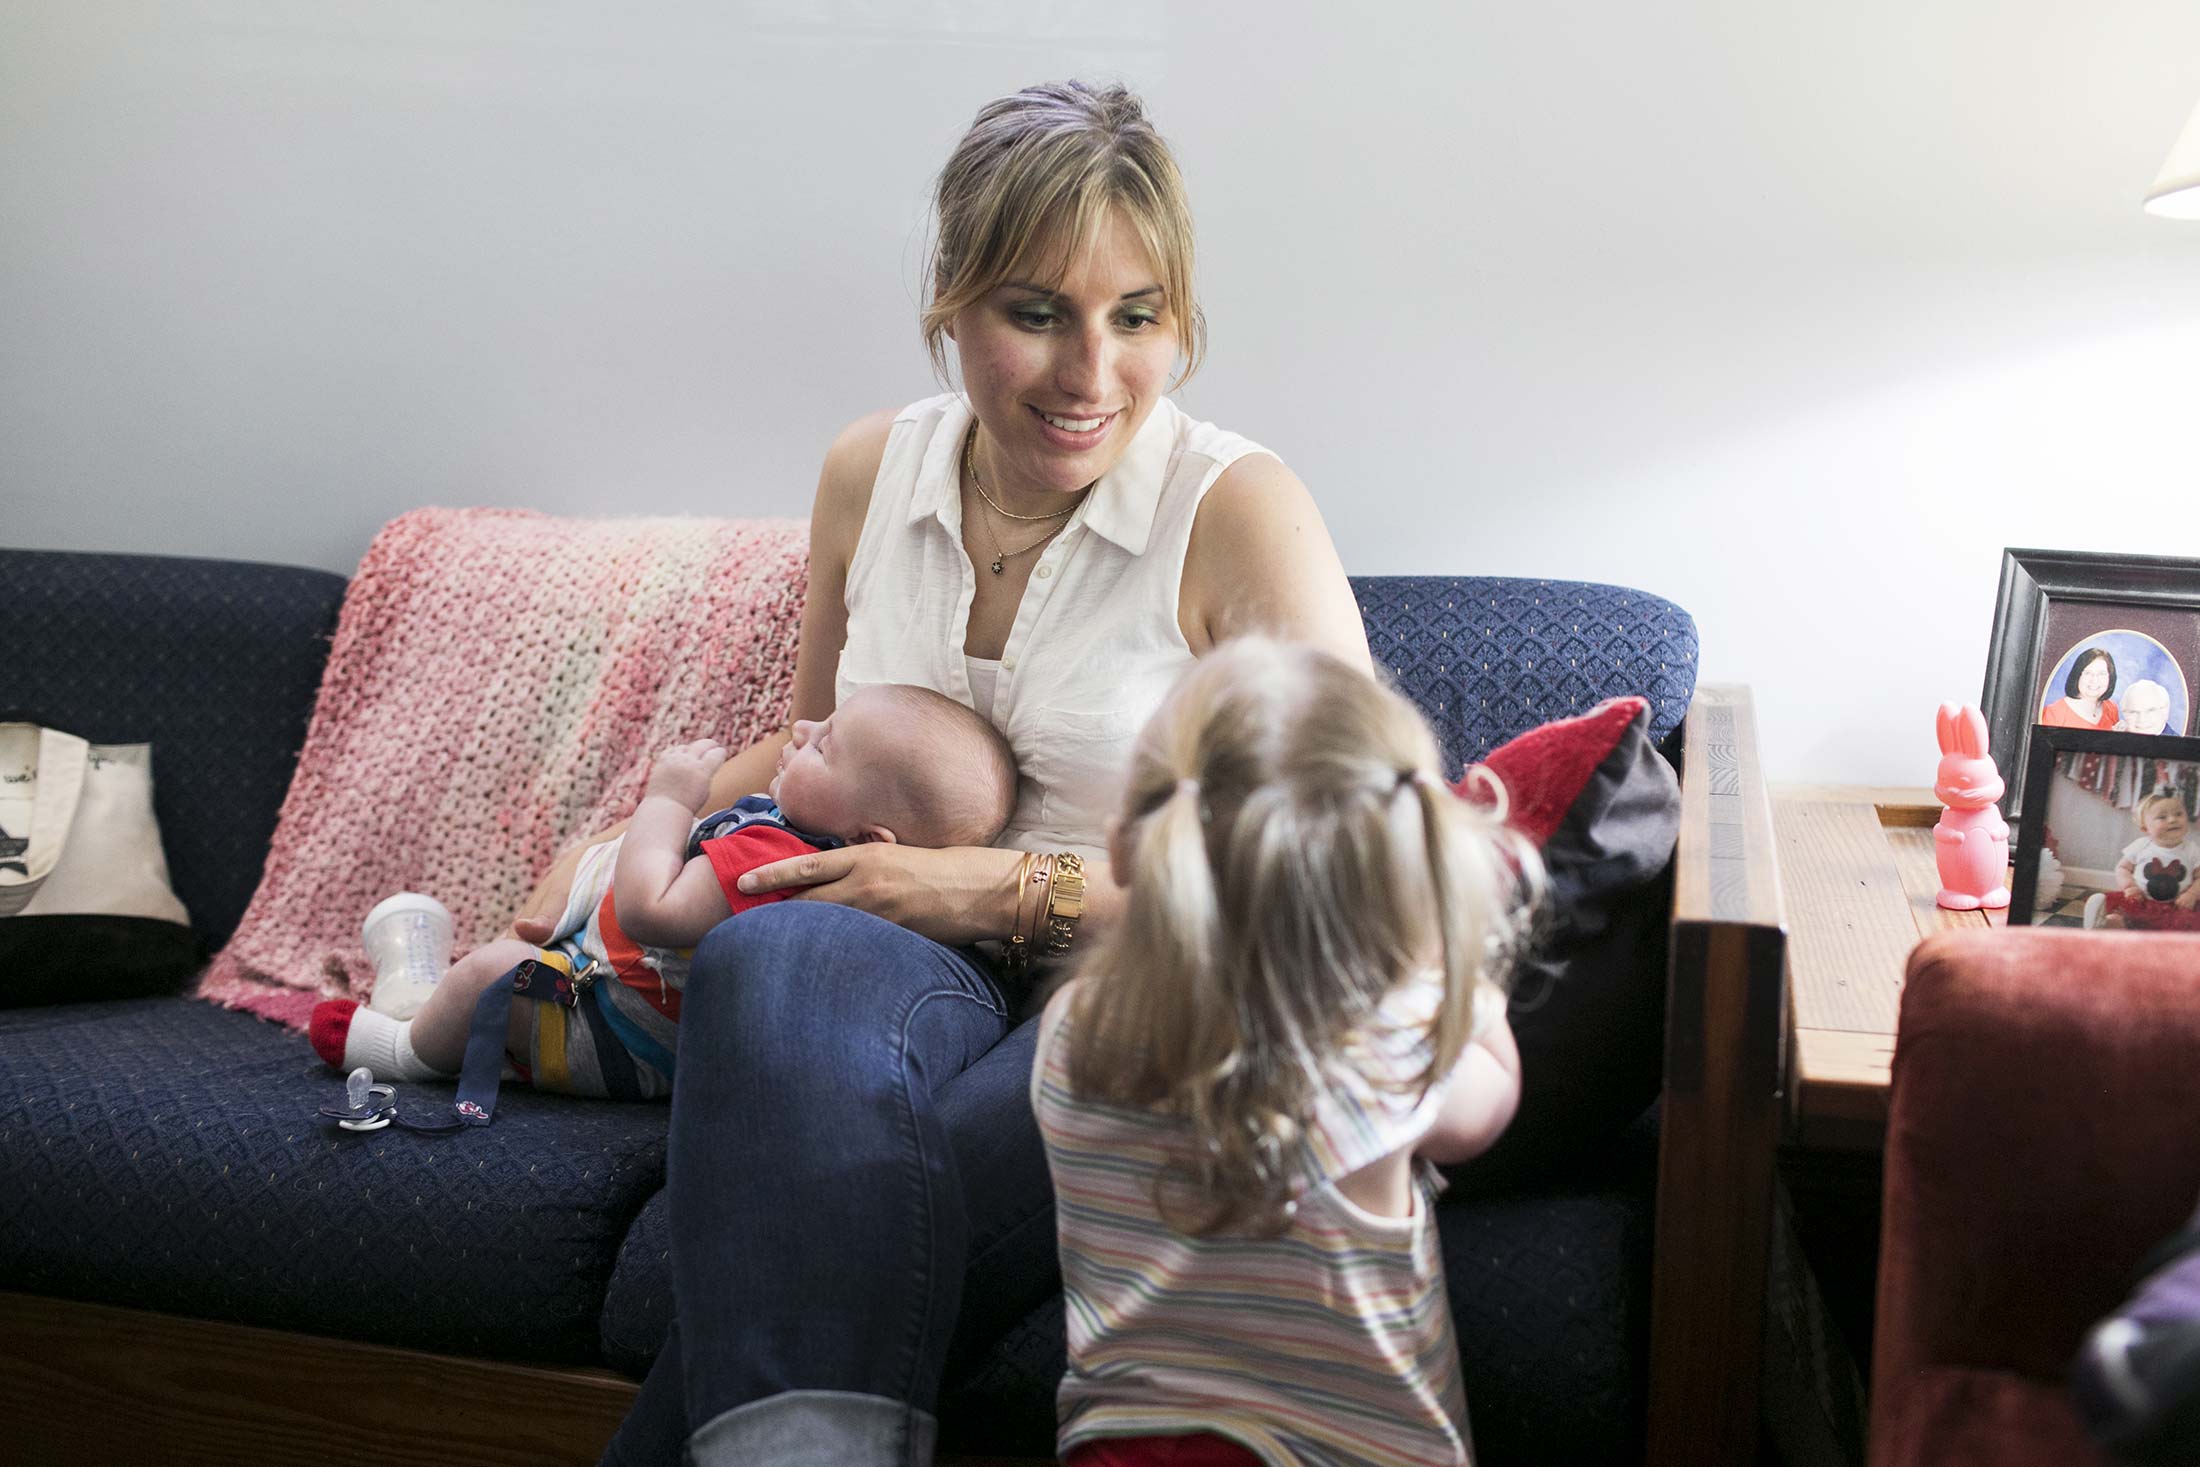 Celeste Blau sits on the couch holding her son Finneas while playing with Clementine.